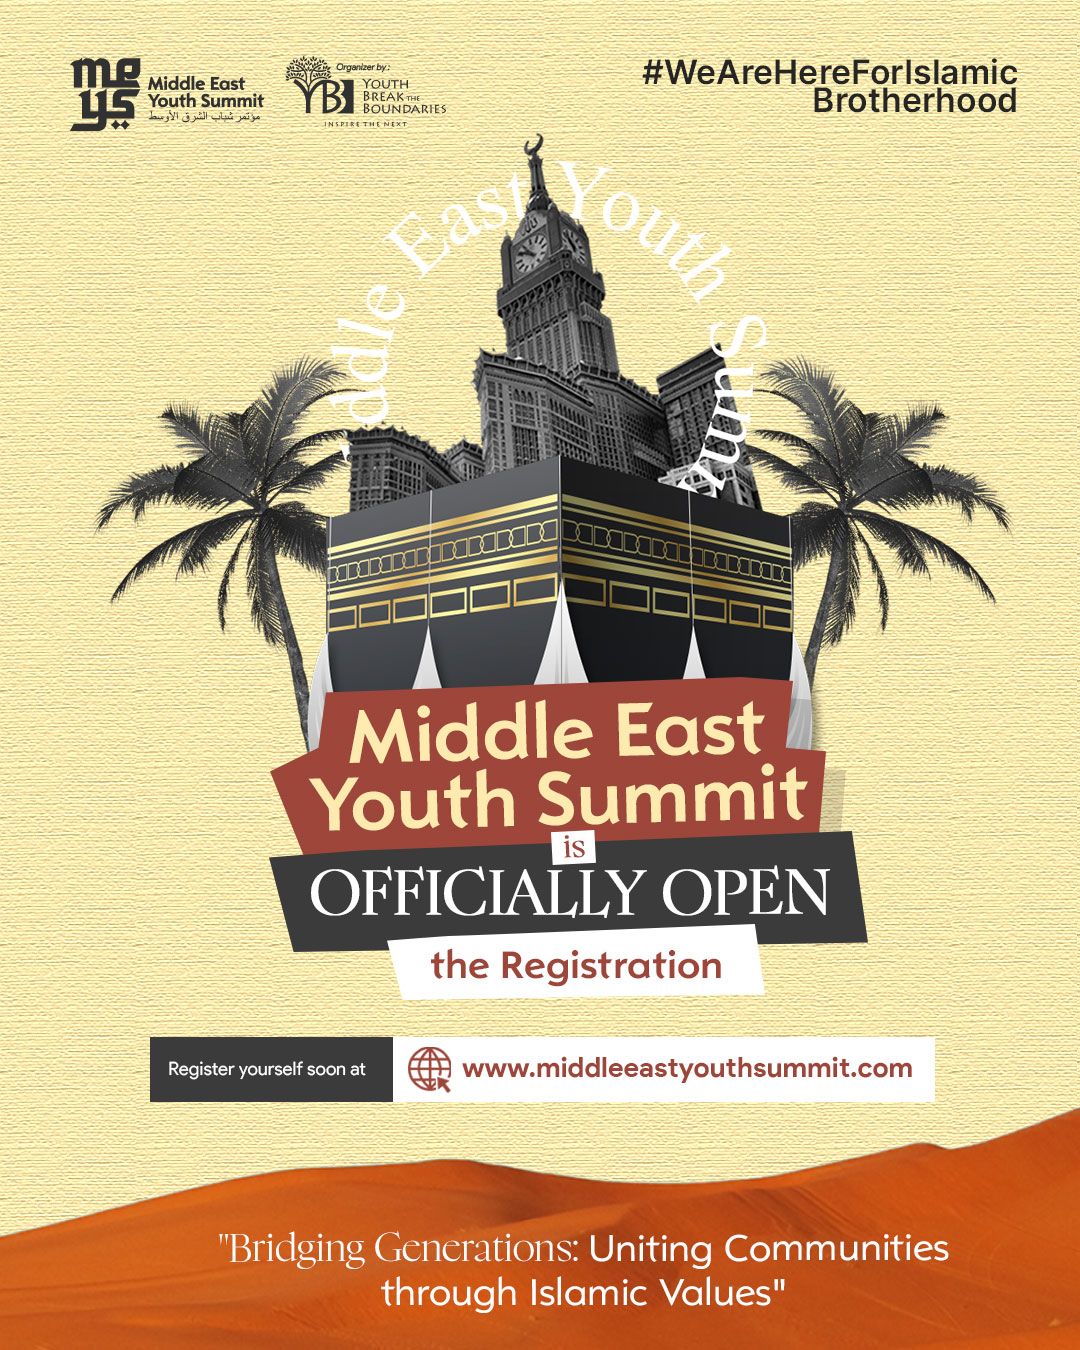 Registration for International Conferences with Umrah Through the Middle East Youth Summit Is Now Open!